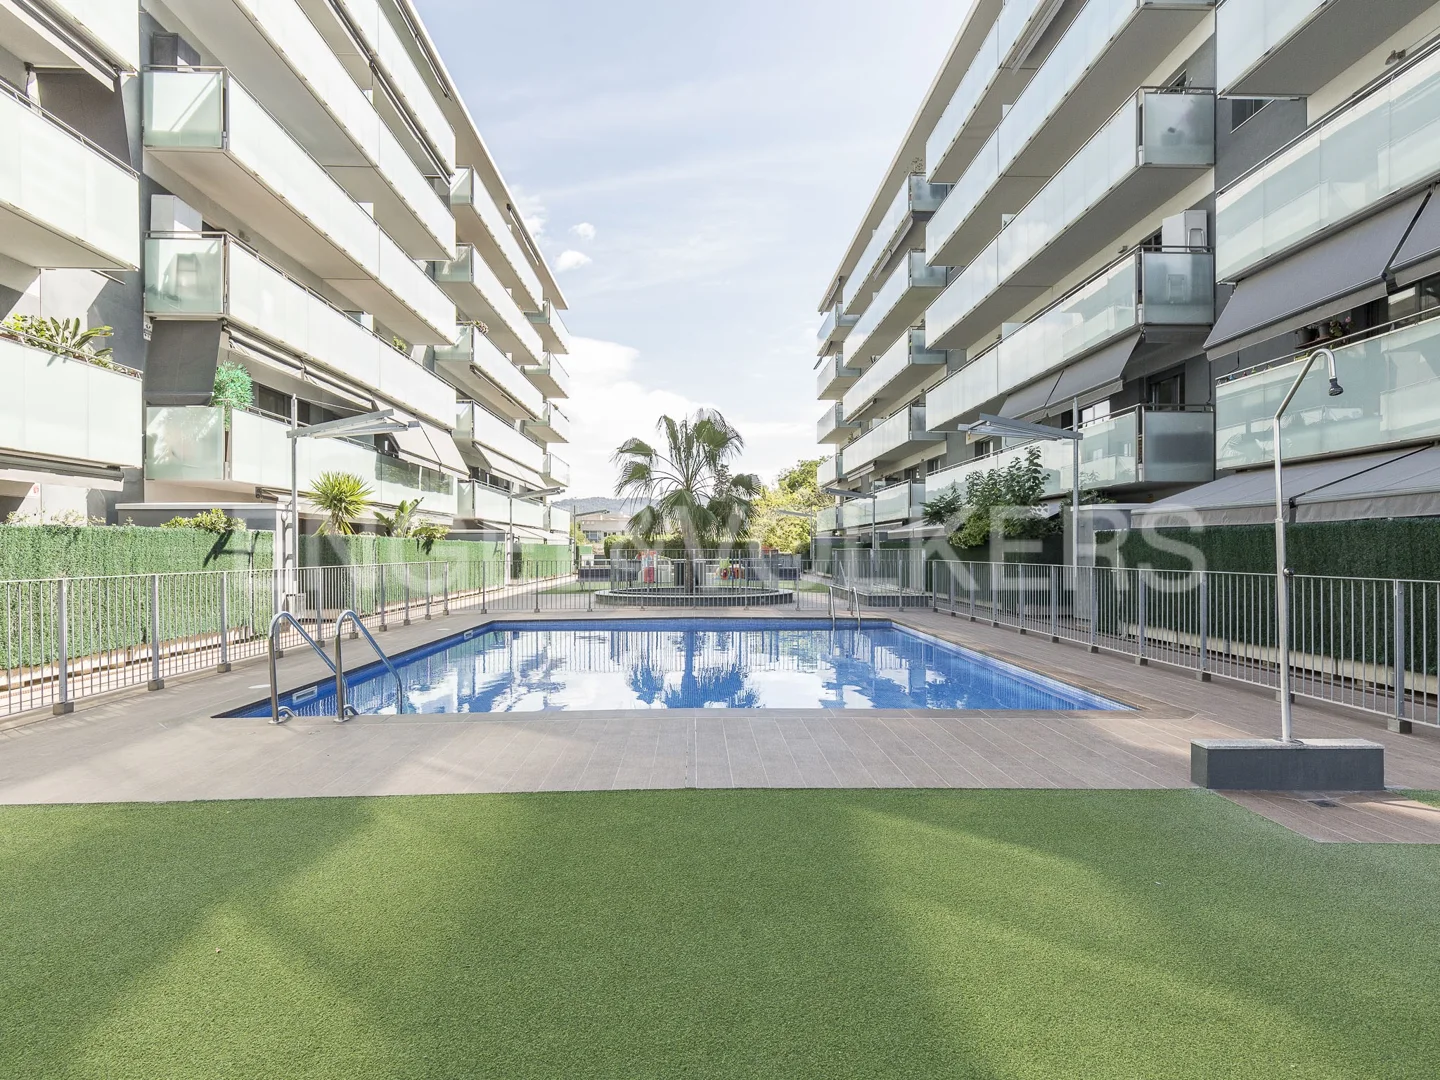 3-bedroom apartment with communal pool in Sant Just Desvern